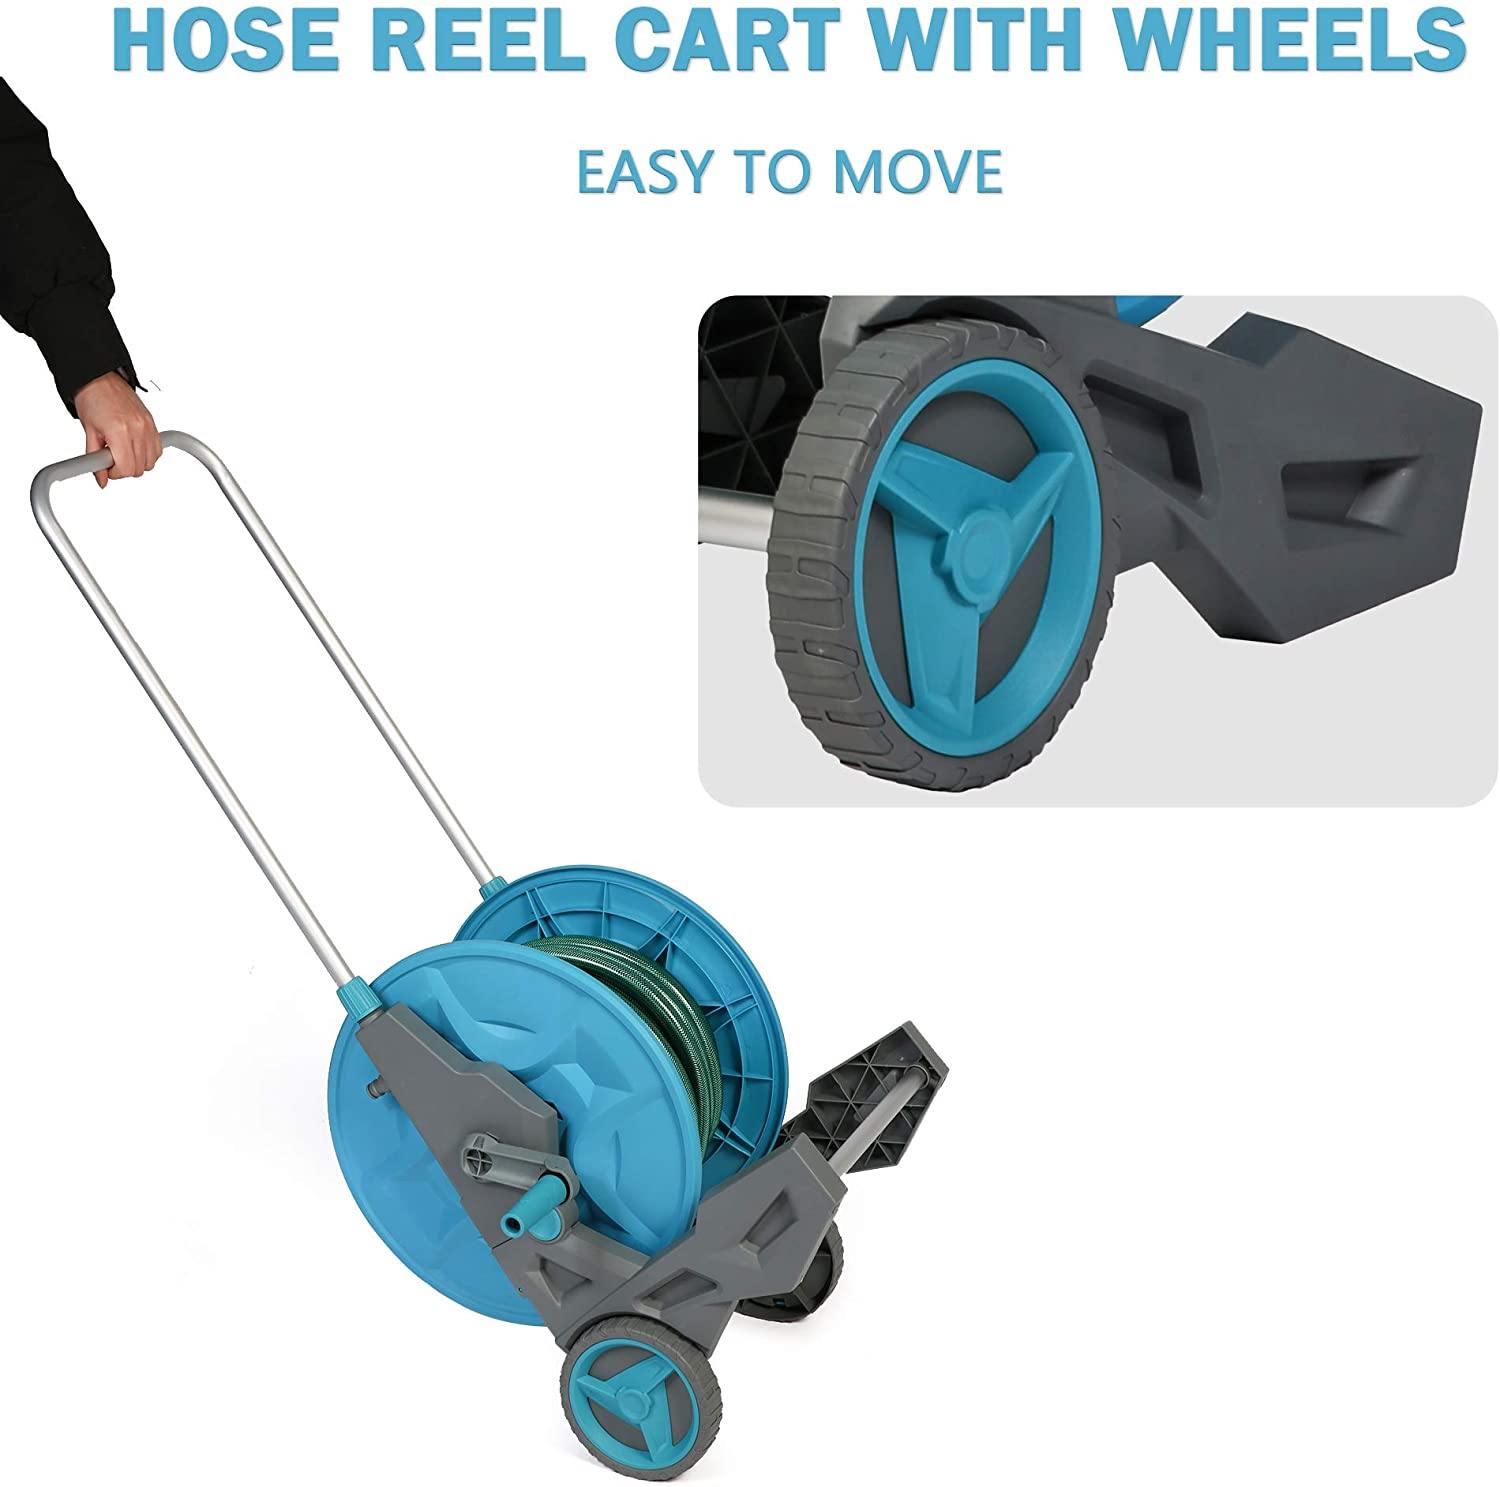 Garden Hose Reel Cart with Wheels, Water Hose Reel Mobile Cart with 8 Patterns Hose Nozzle 3/4" Connector, for Garden Watering, Car Washing - Bosonshop